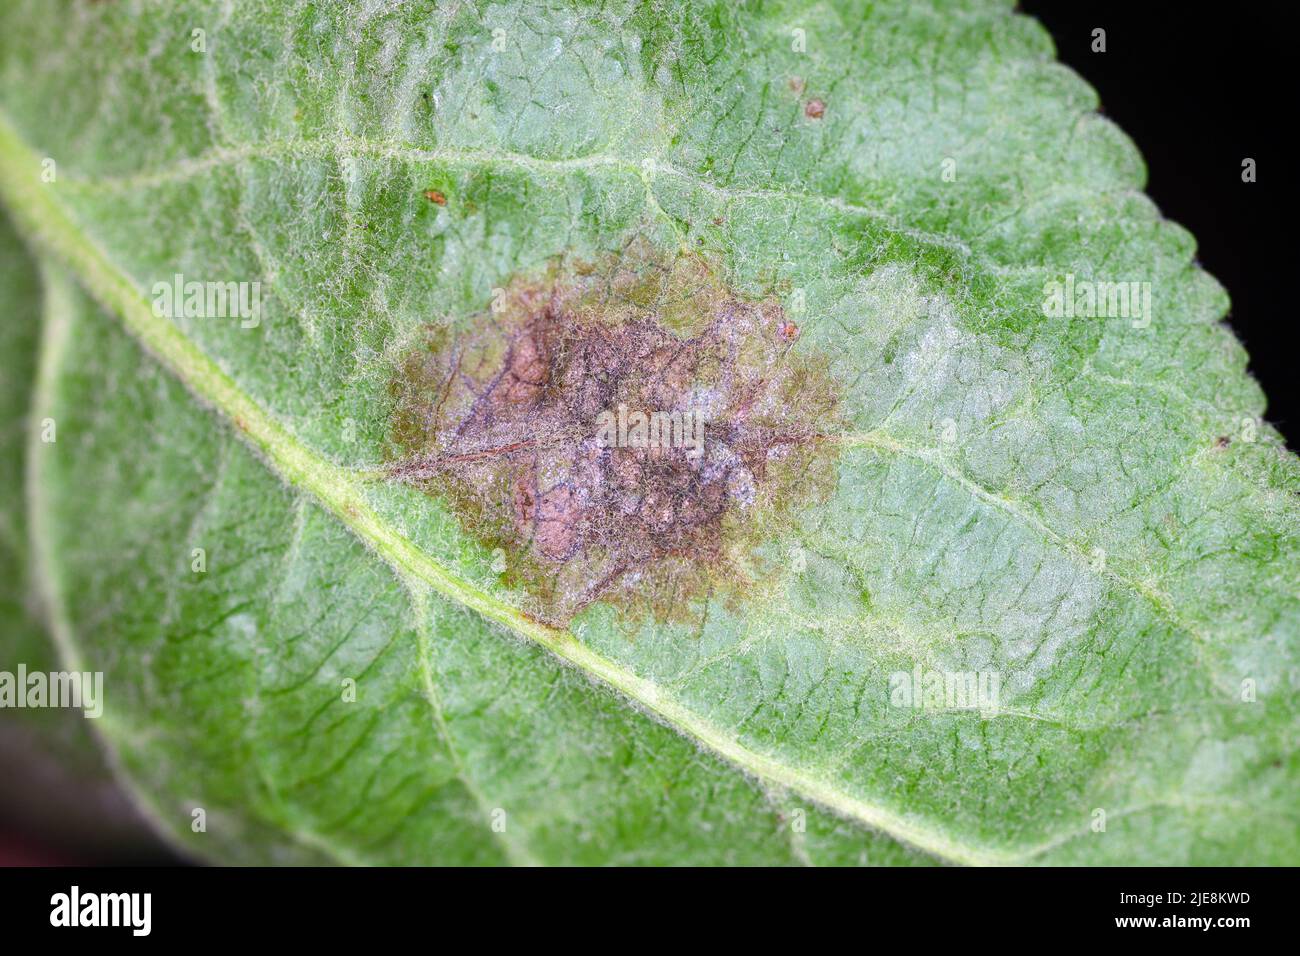 Scab Venturia inaequalis development of disease on the stem on the lower side of the apple leaf. High magnification. Stock Photo